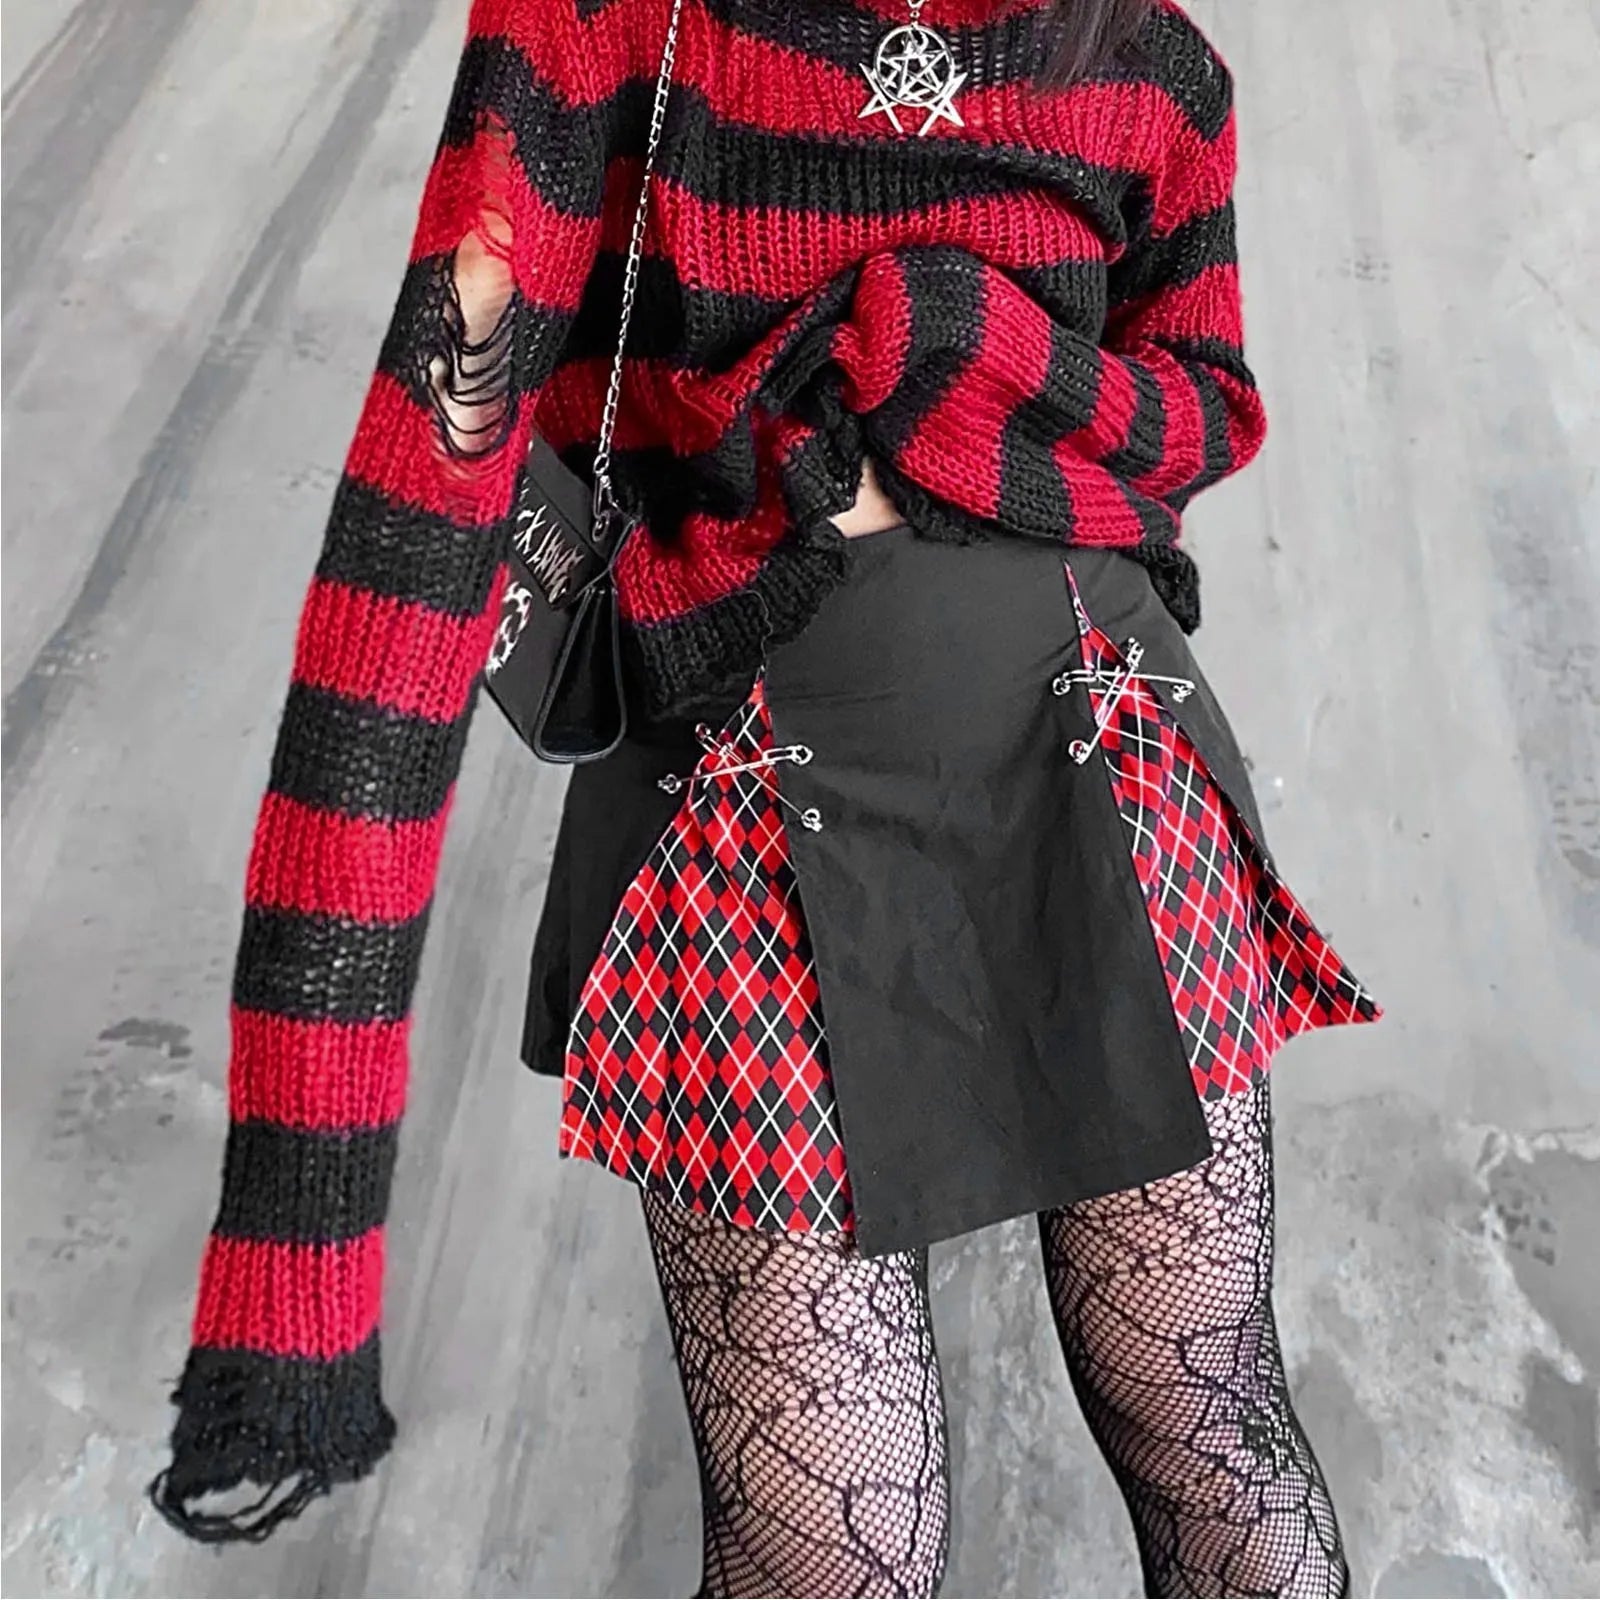 Red Abyss Oversized Sweater - A Gothic Universe - Sweaters